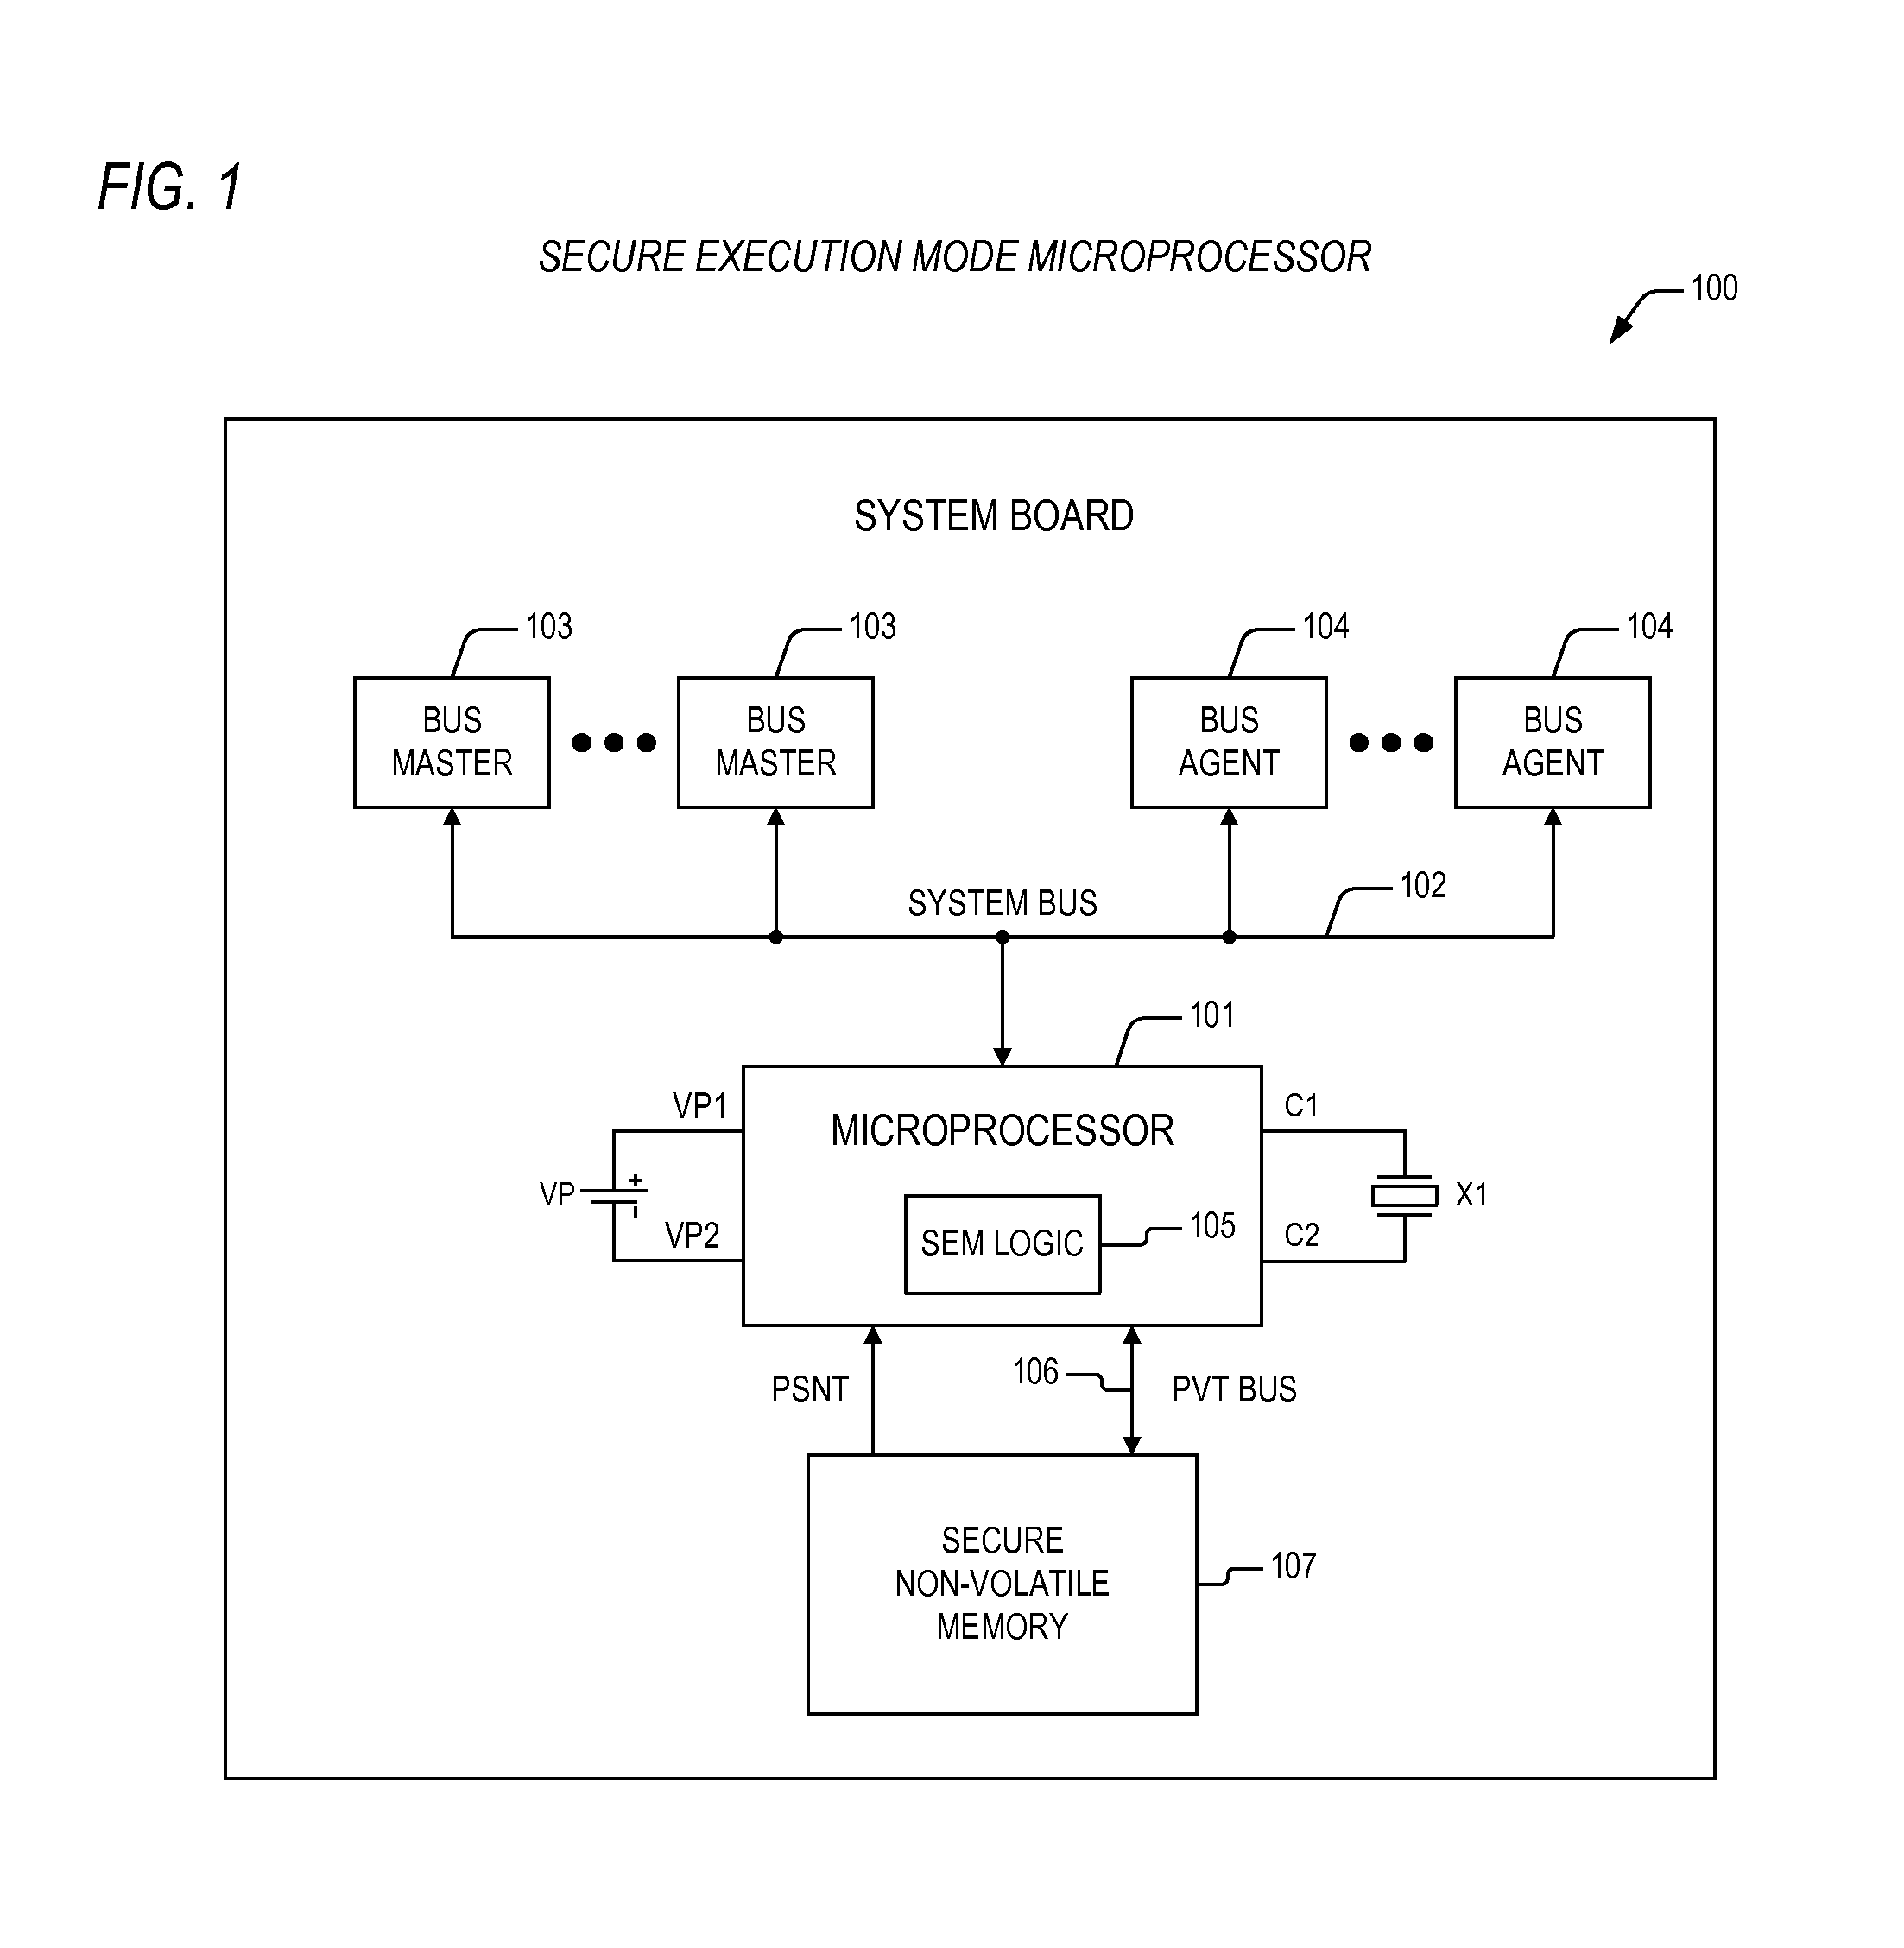 Initialization of a microprocessor providing for execution of secure code